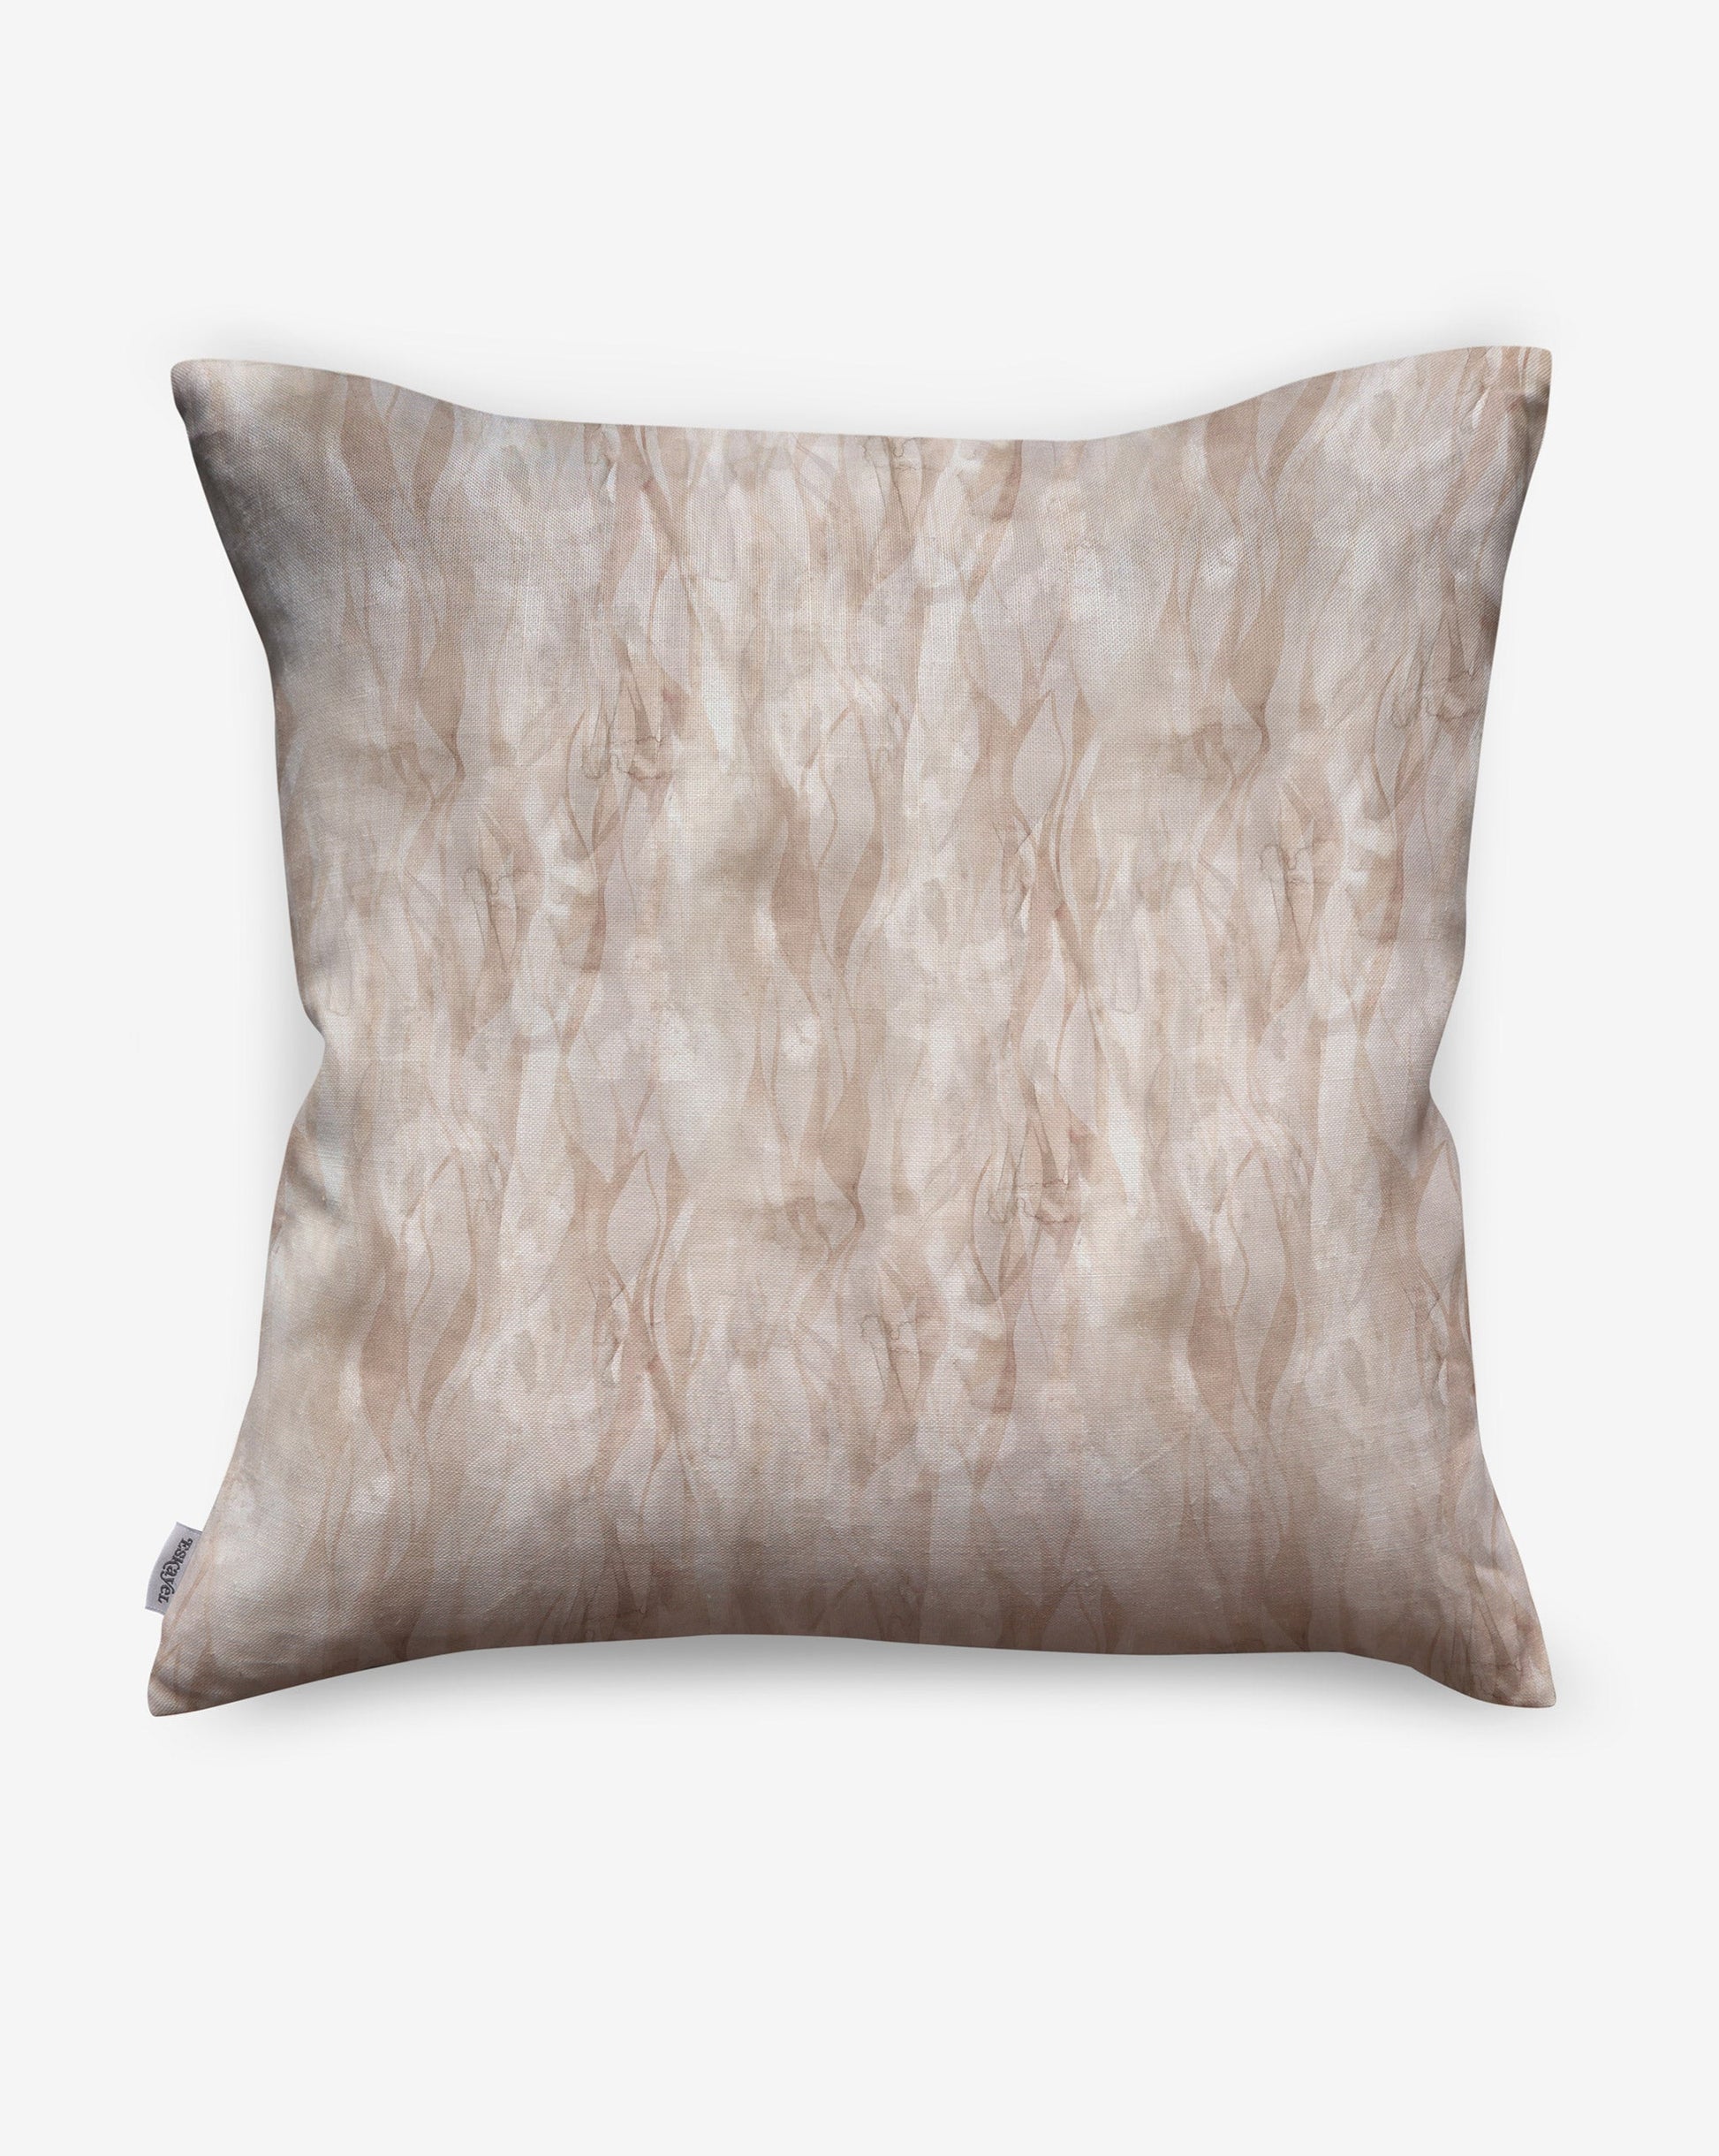 Cascade pillows by Eskayel in the Quartz colorway incorporate beautiful pink and beige tones.